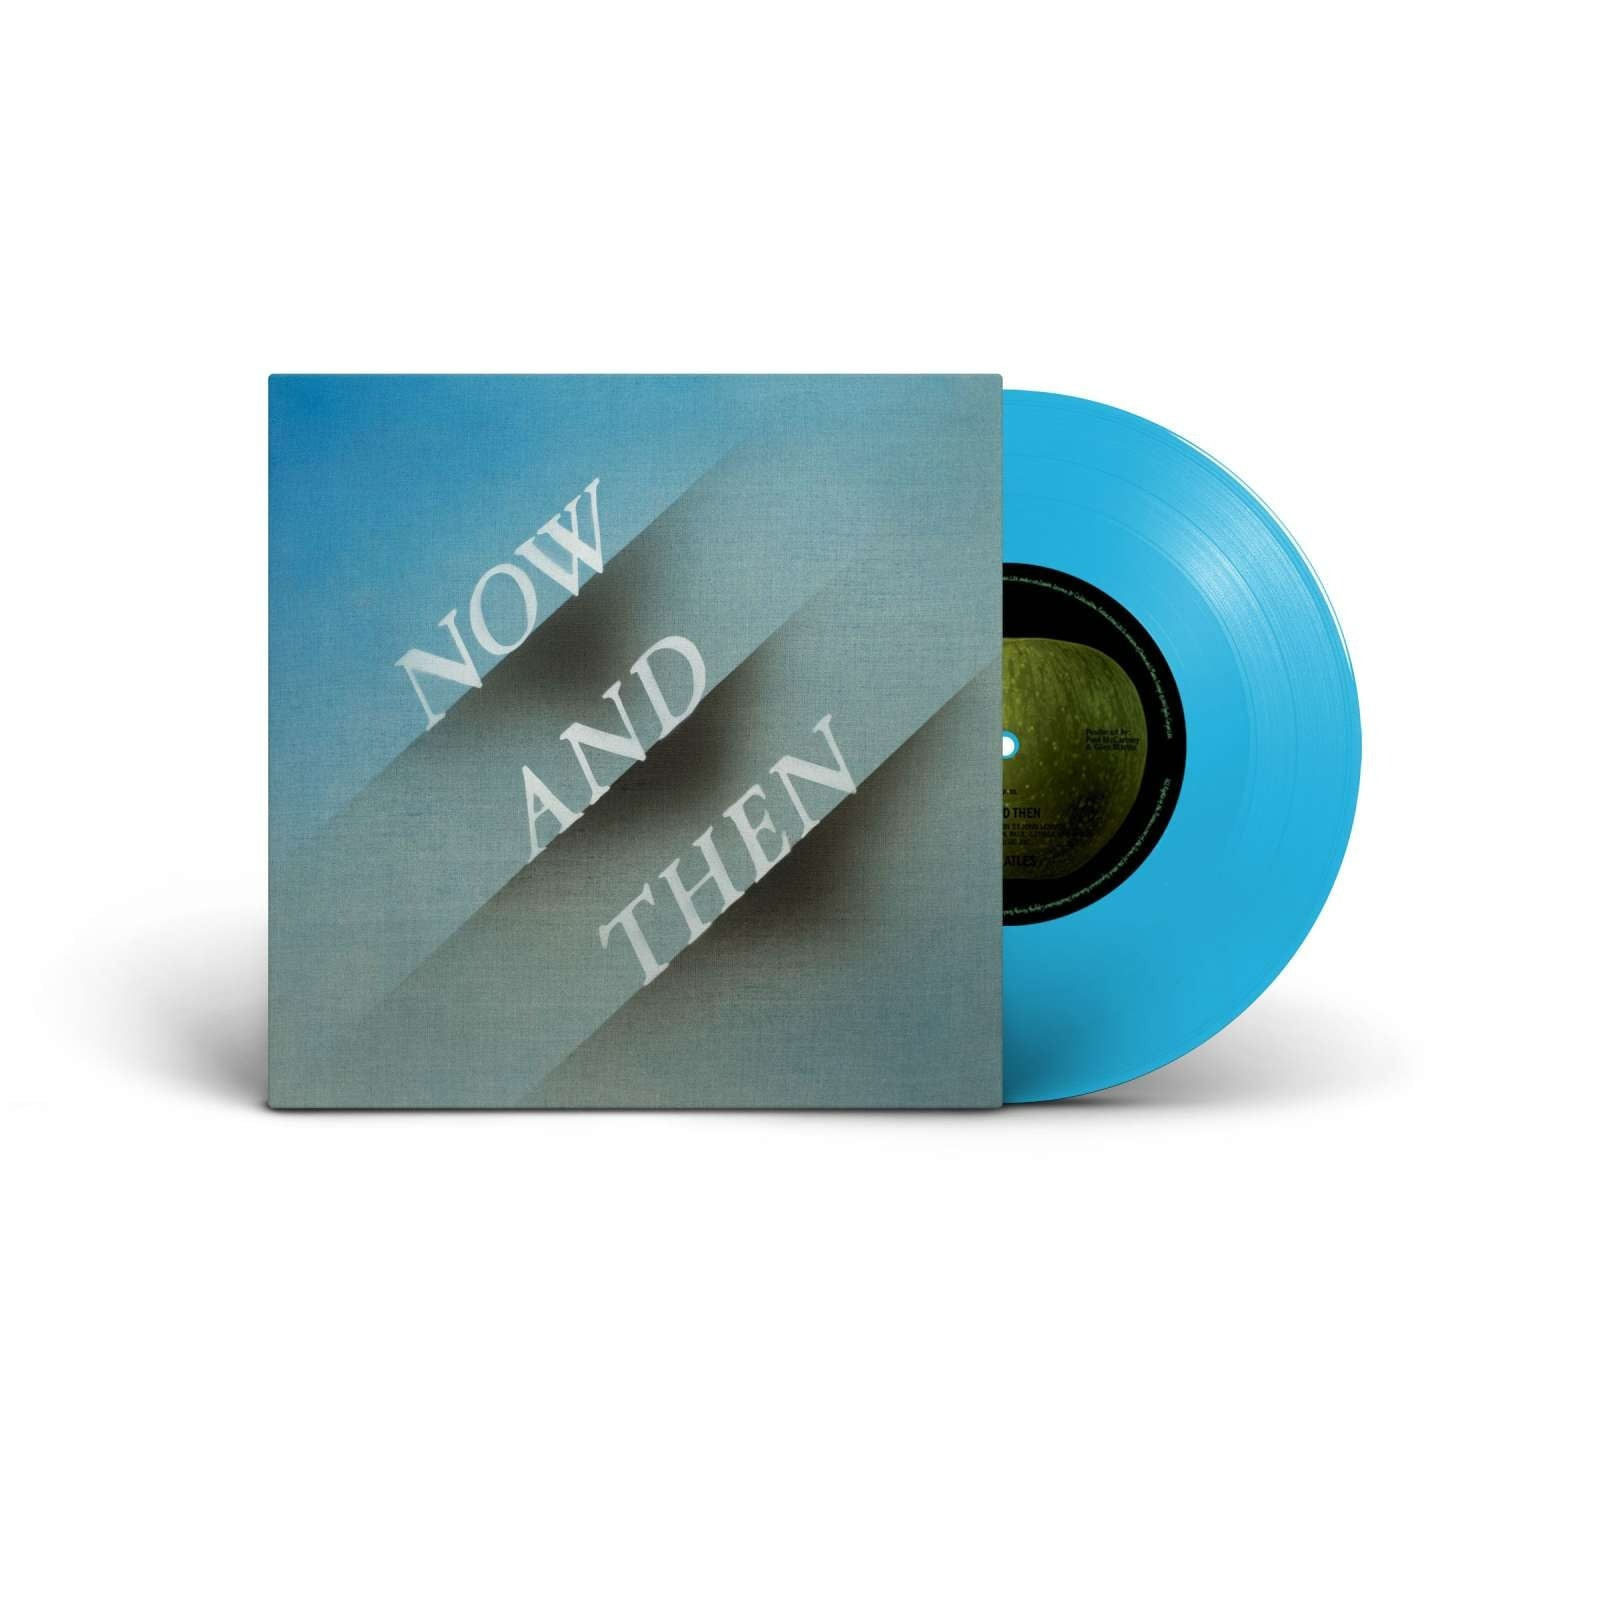 NOW AND THEN -VINILO 7   AZUL-